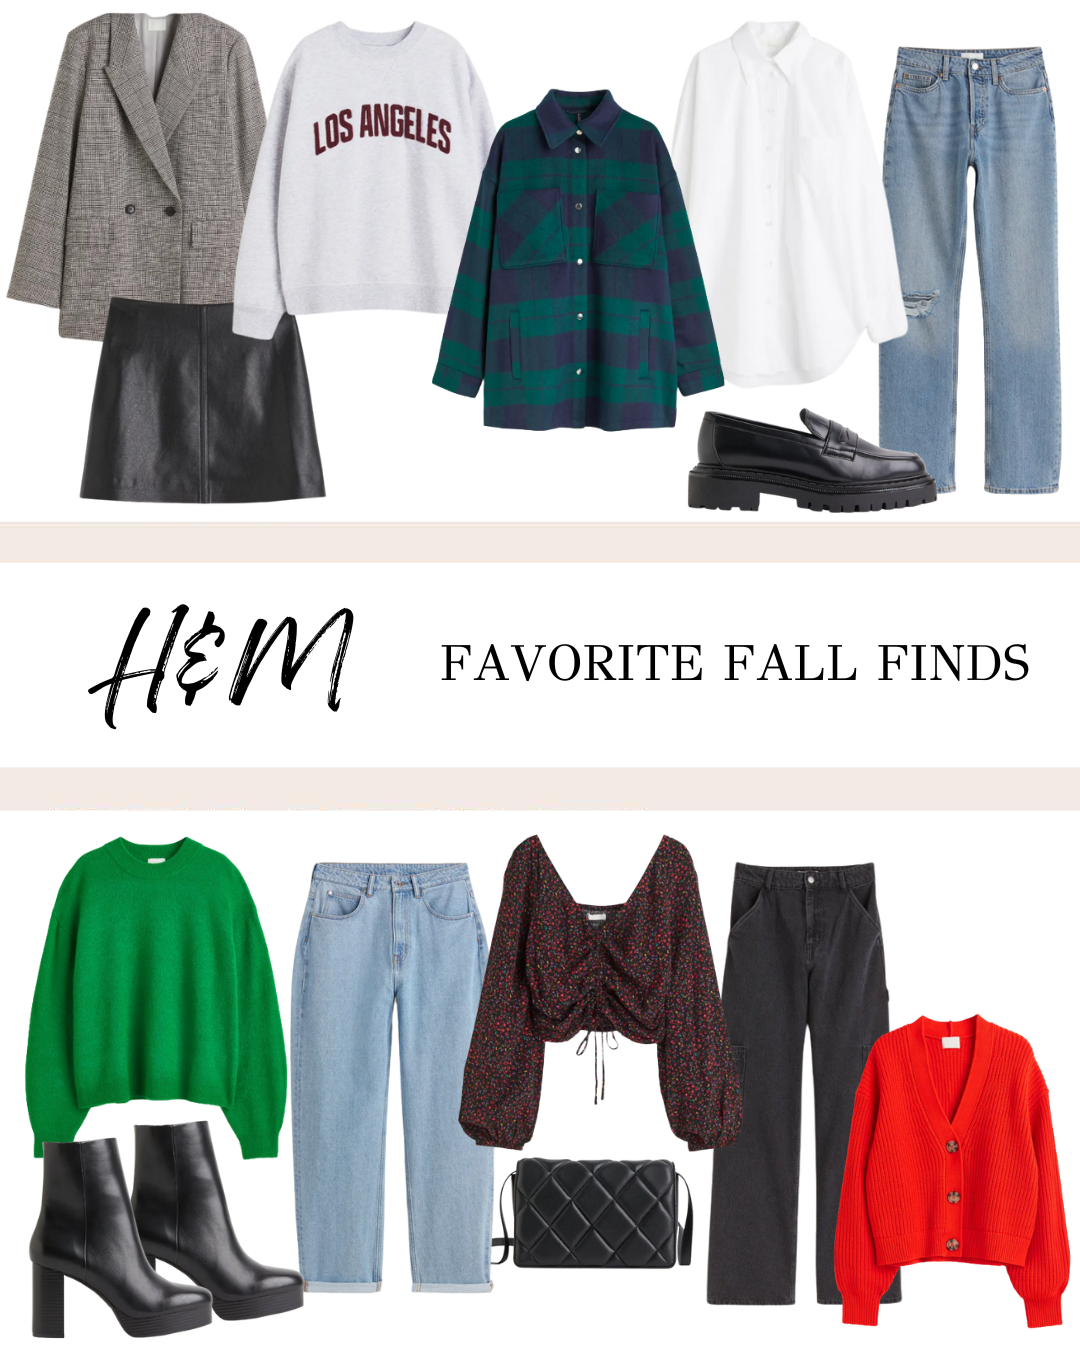 Trendy Fall Fashion from H&M